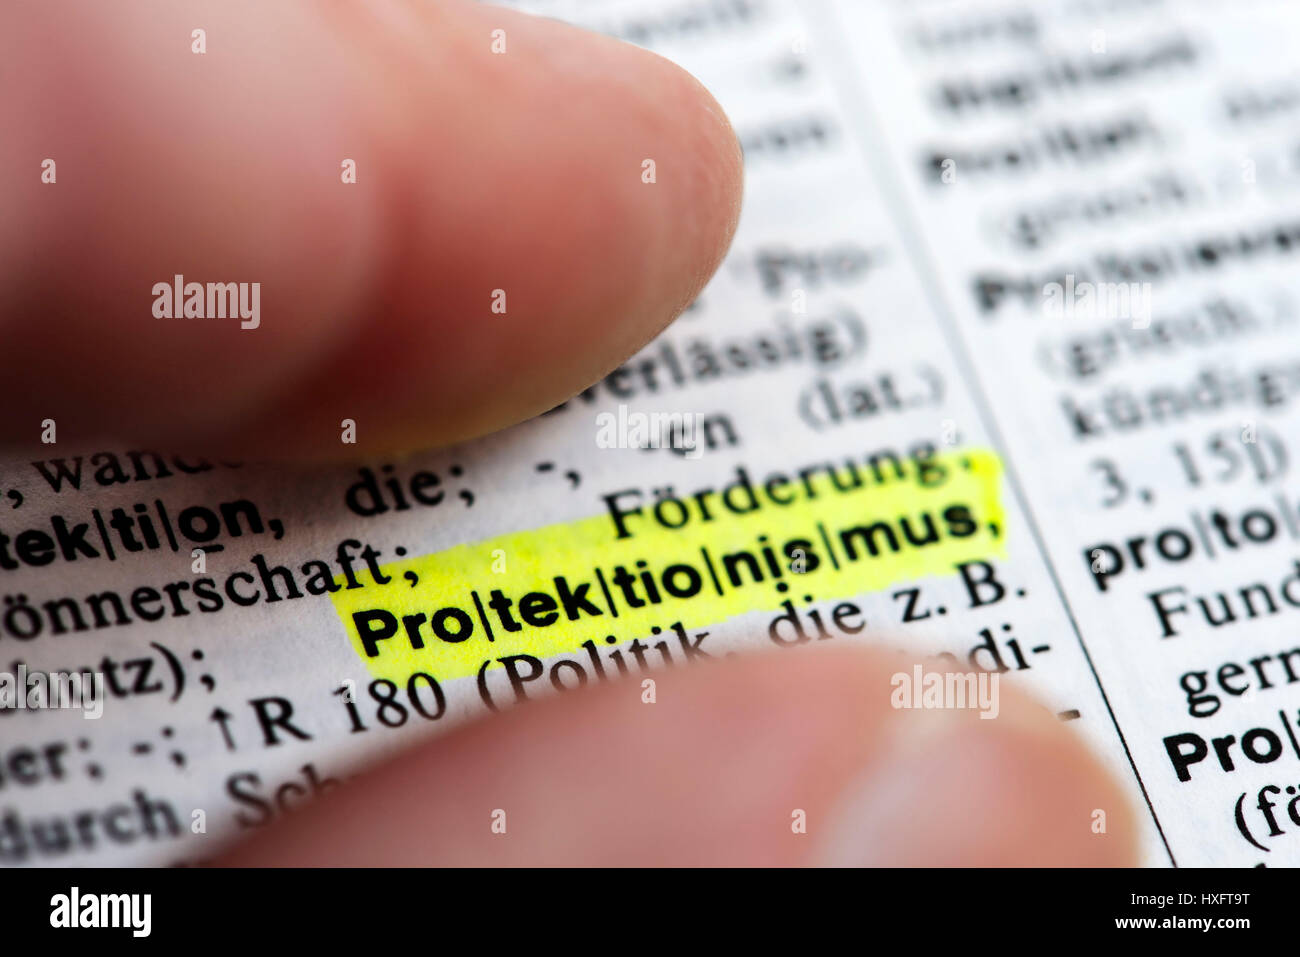 The word Protectionism in a dictionary, Das Wort Protektionismus in einem WÃ¶rterbuch Stock Photo